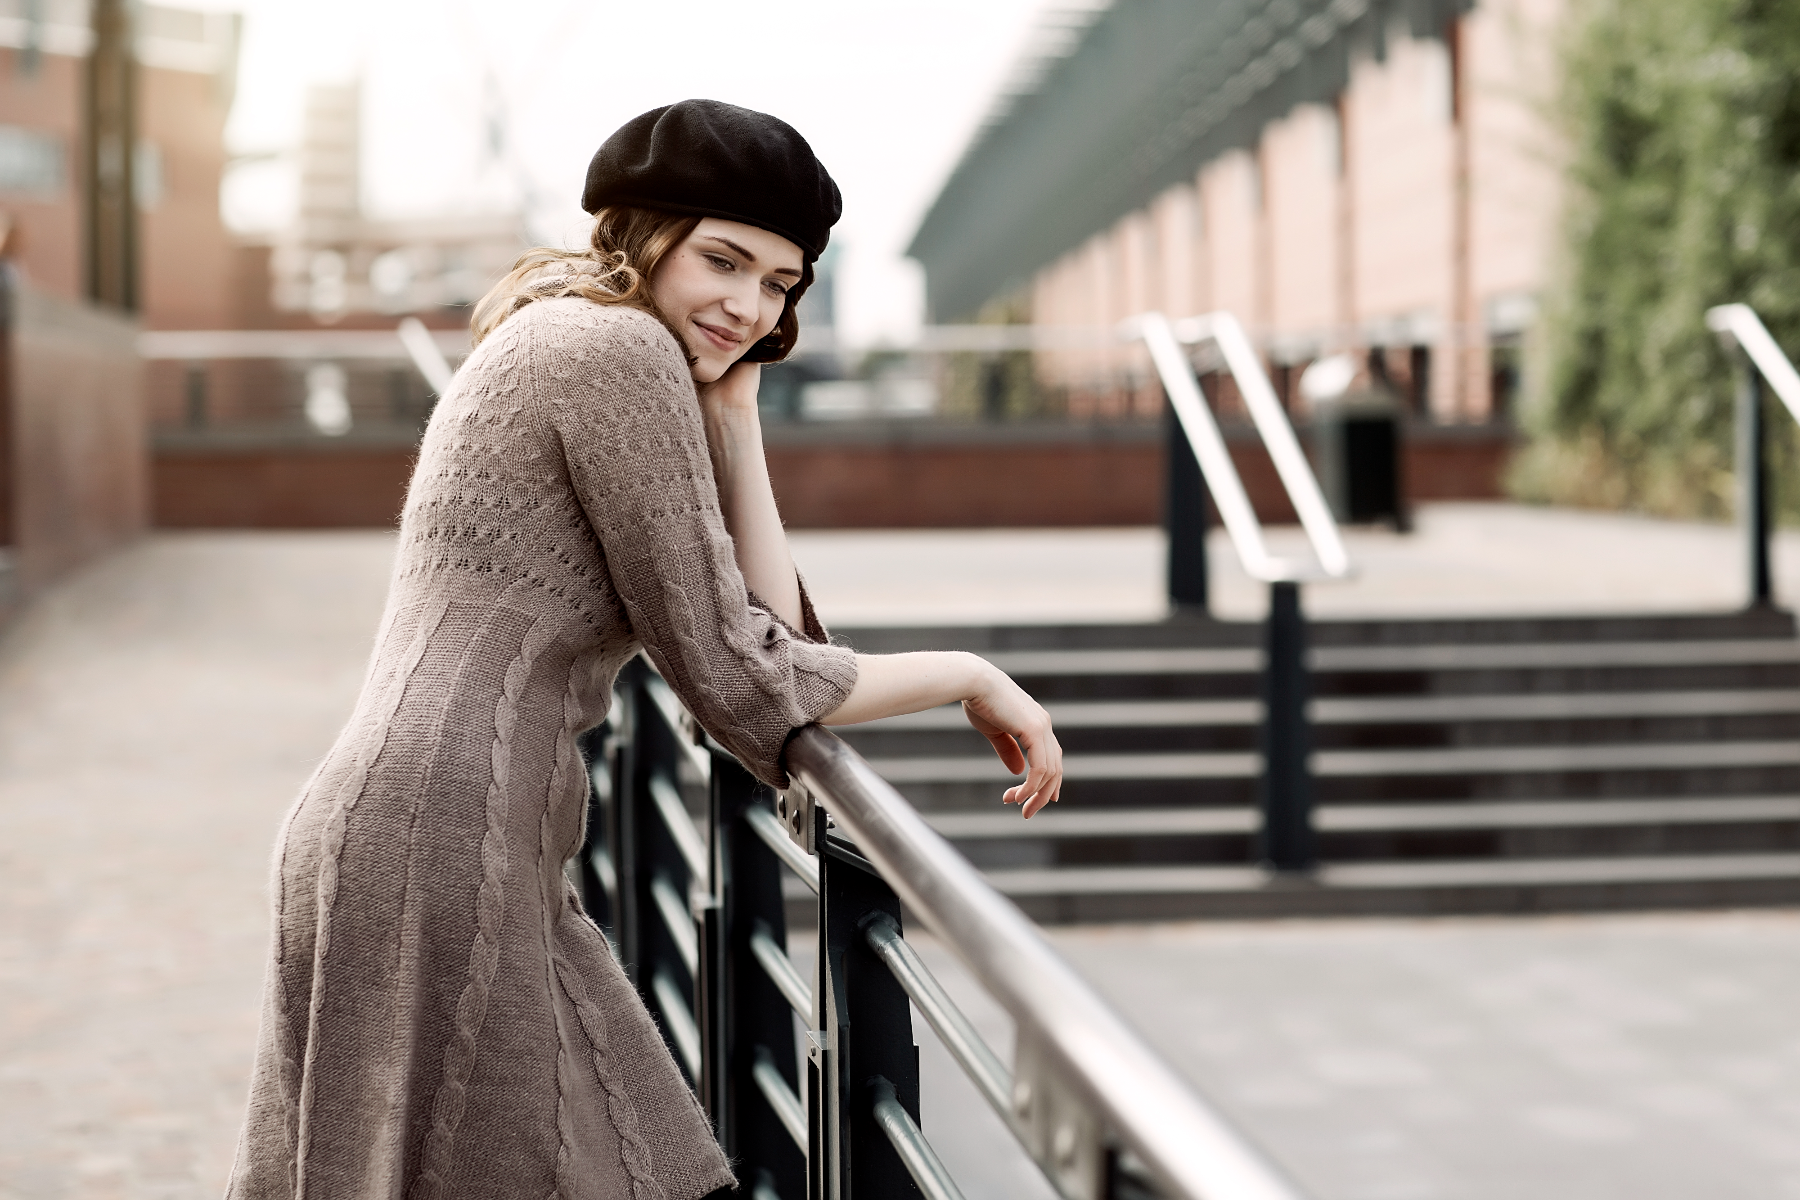 Portrait of a young woman wearing a beret and knitted dress leaning on a railing